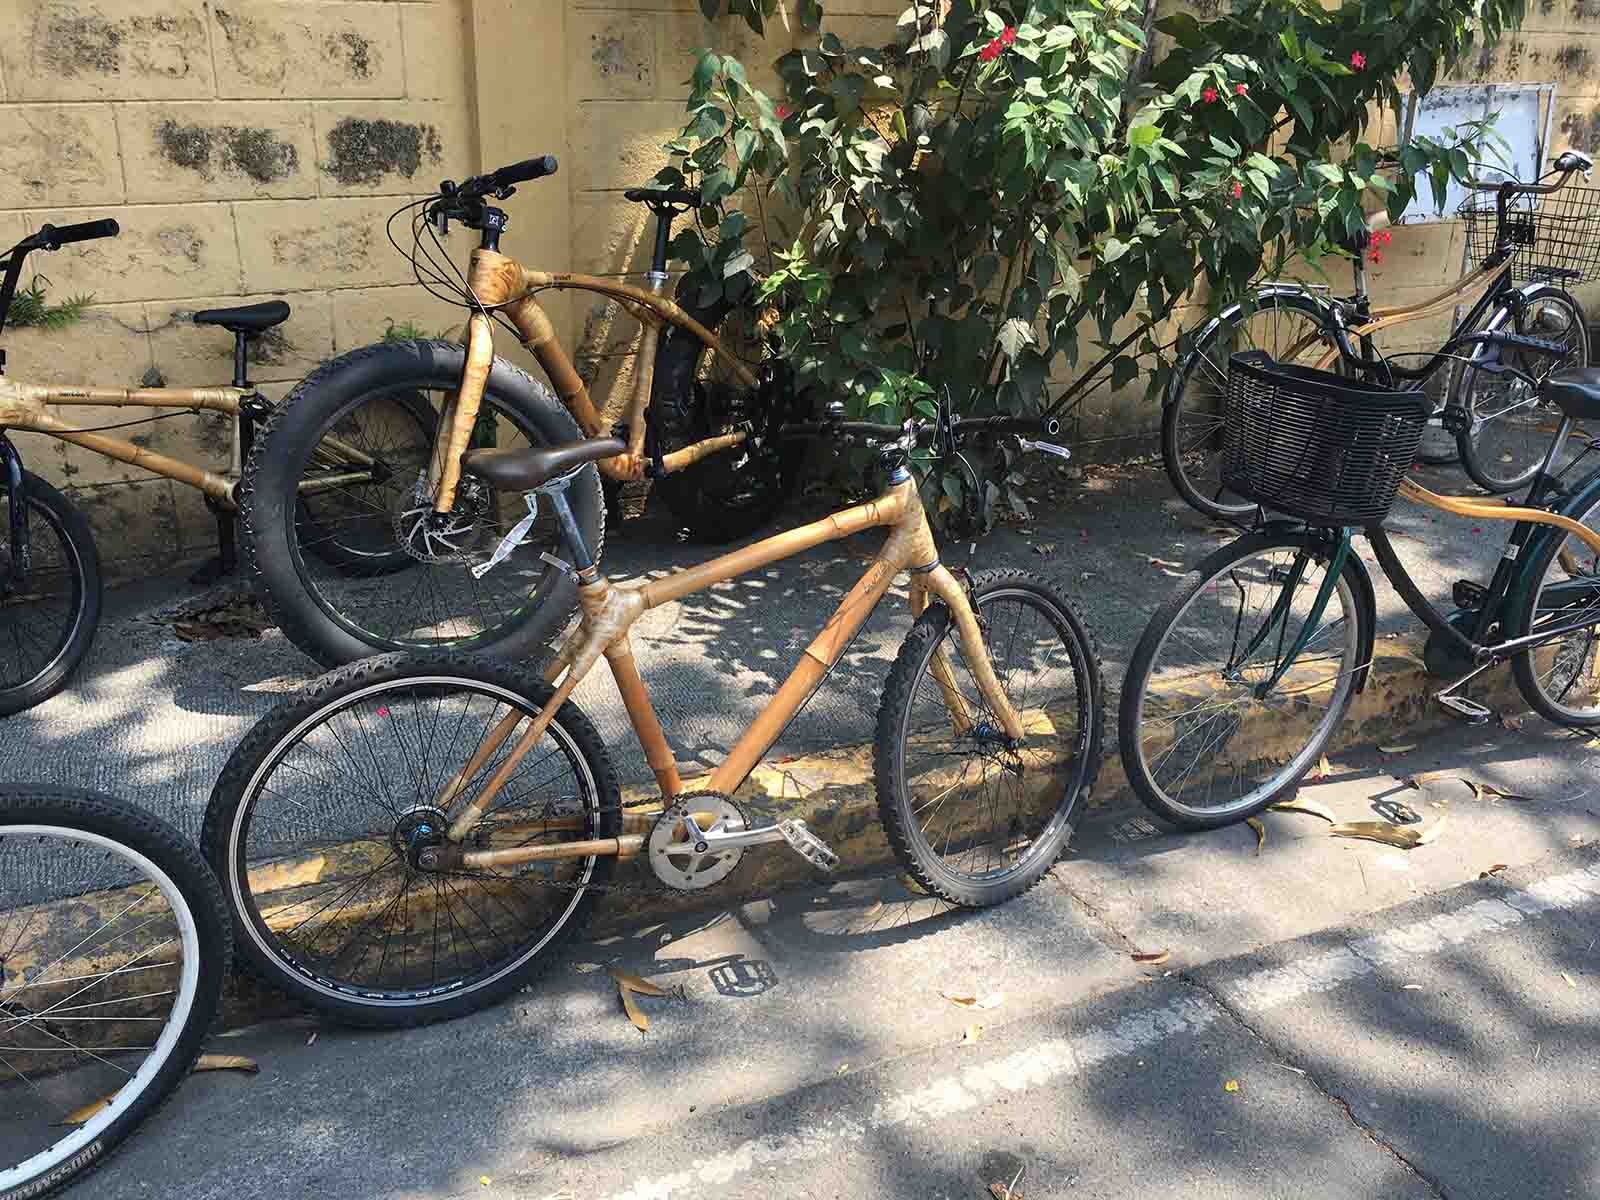 Tour Manila historical site Intramuros on bamboo-framed bikes | Manila: The Pearl of the Orient